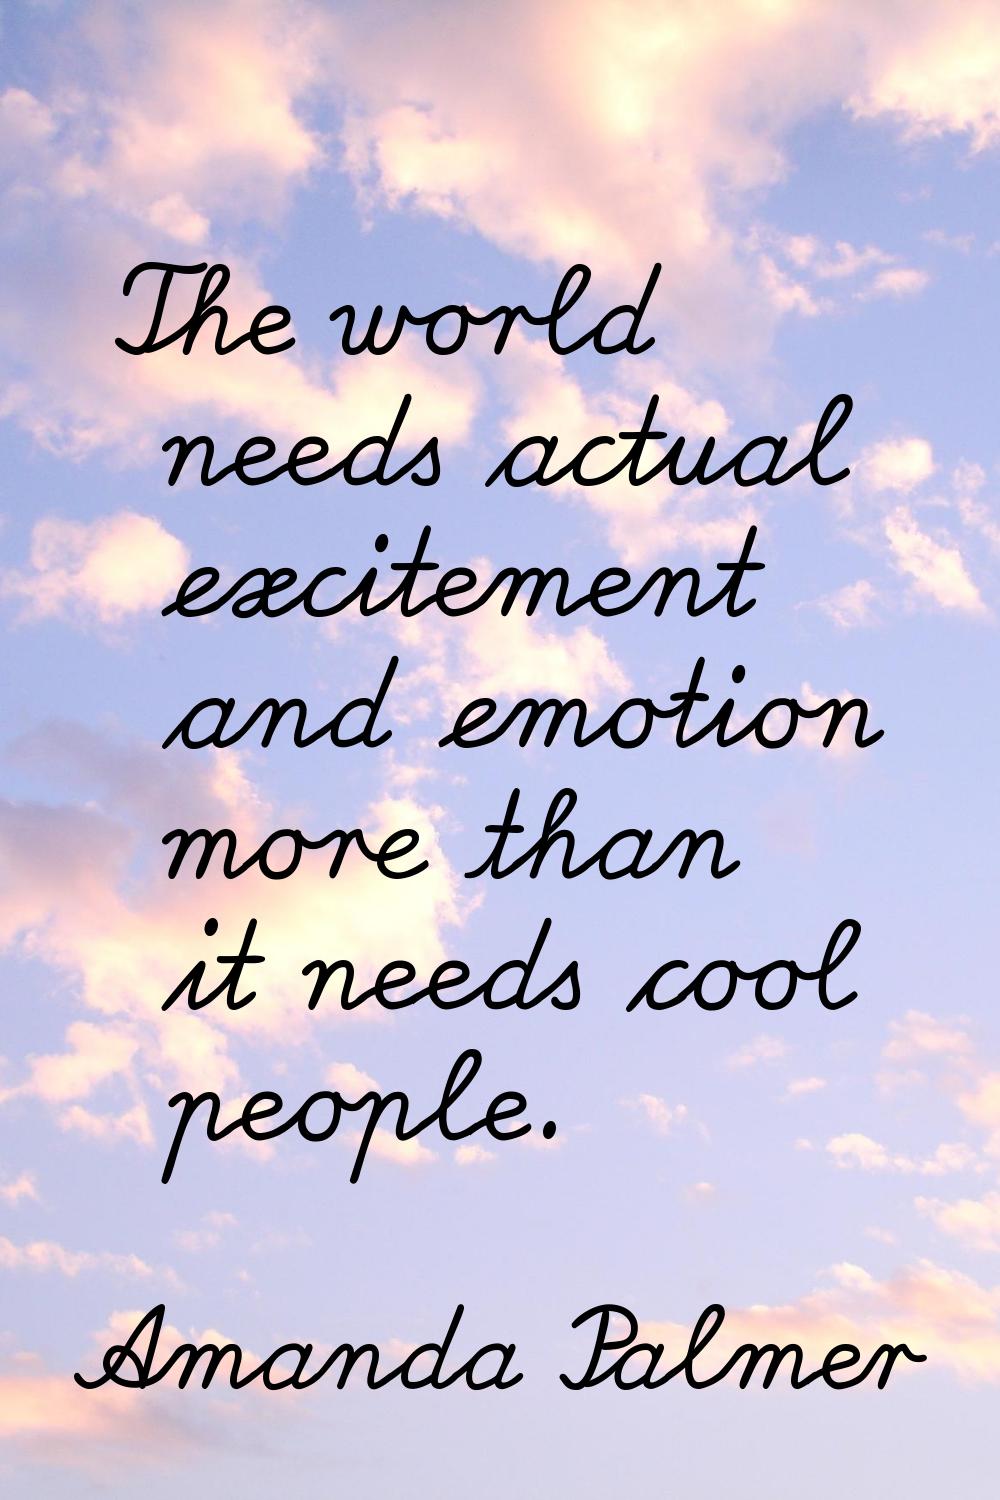 The world needs actual excitement and emotion more than it needs cool people.